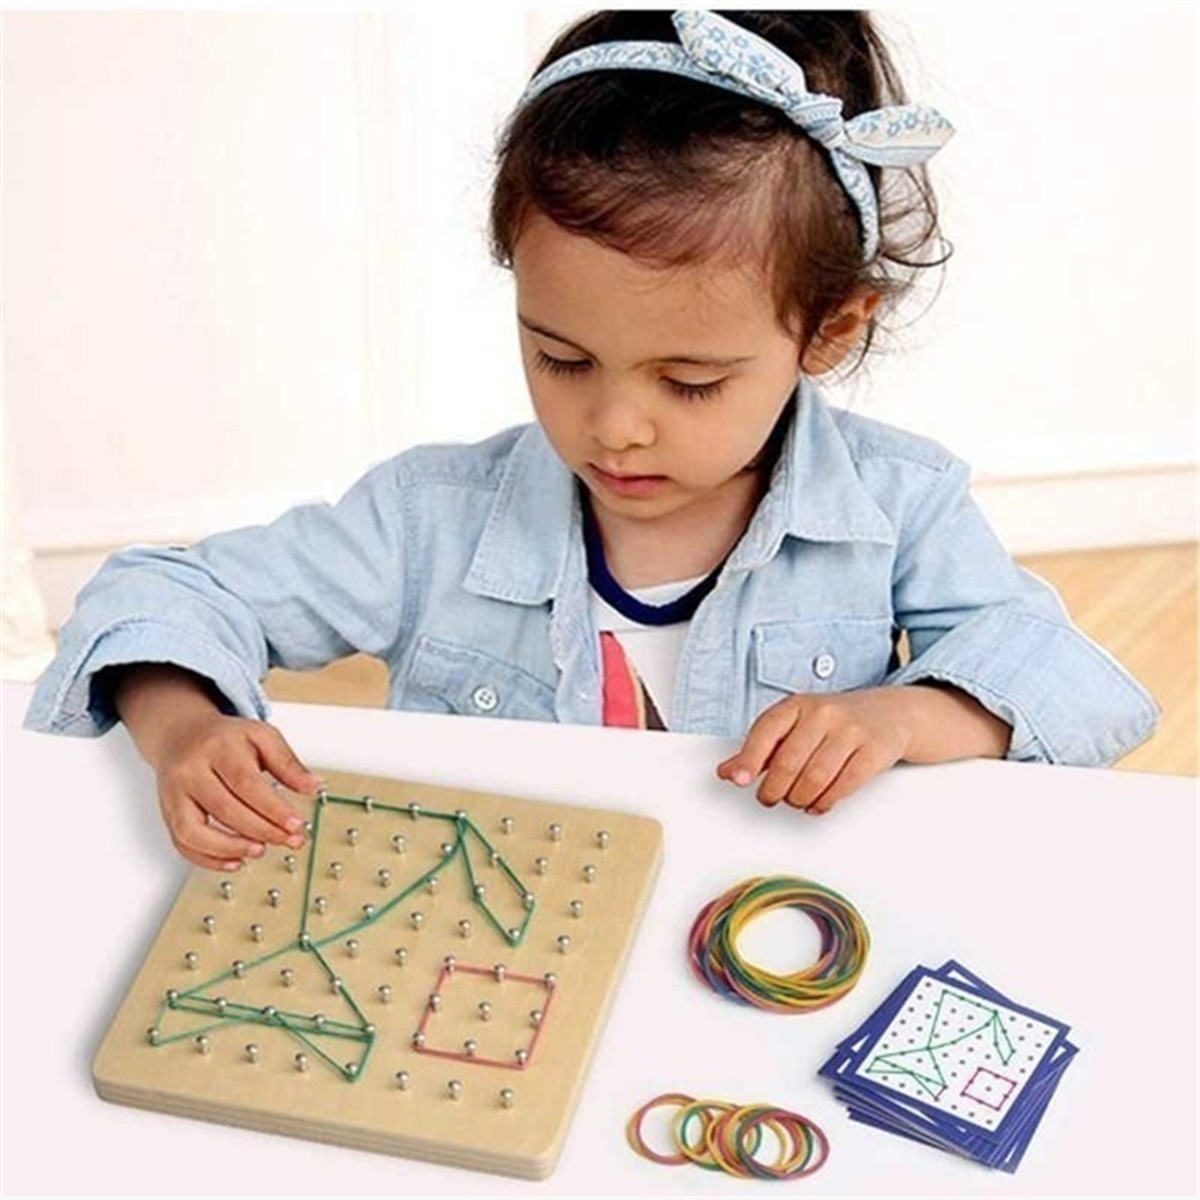 Montessori-Traditional-Teaching-Geometry-Puzzle-Pattern-Educational-School-Home-Game-Toy-for-Kids-Gi-1726969-7